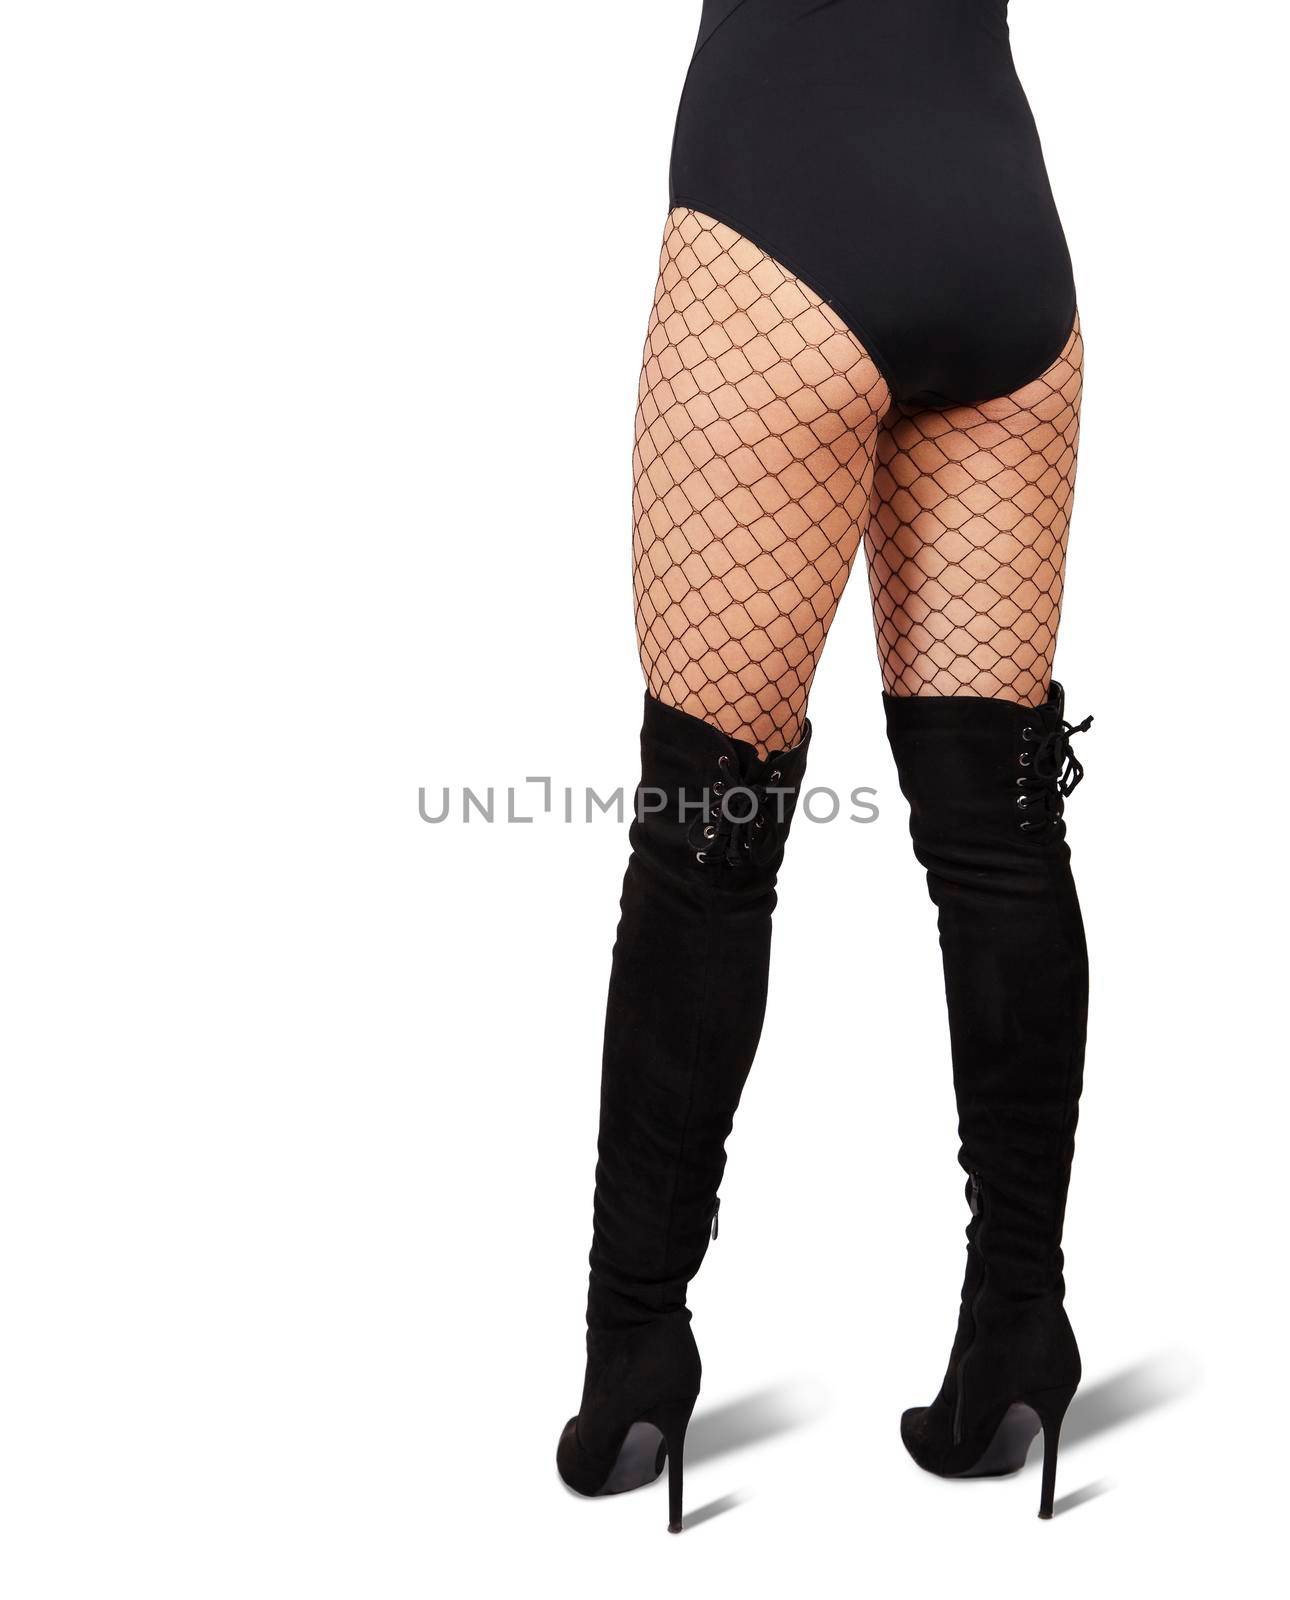 slender female legs in mesh tights and black boots on white background. back view